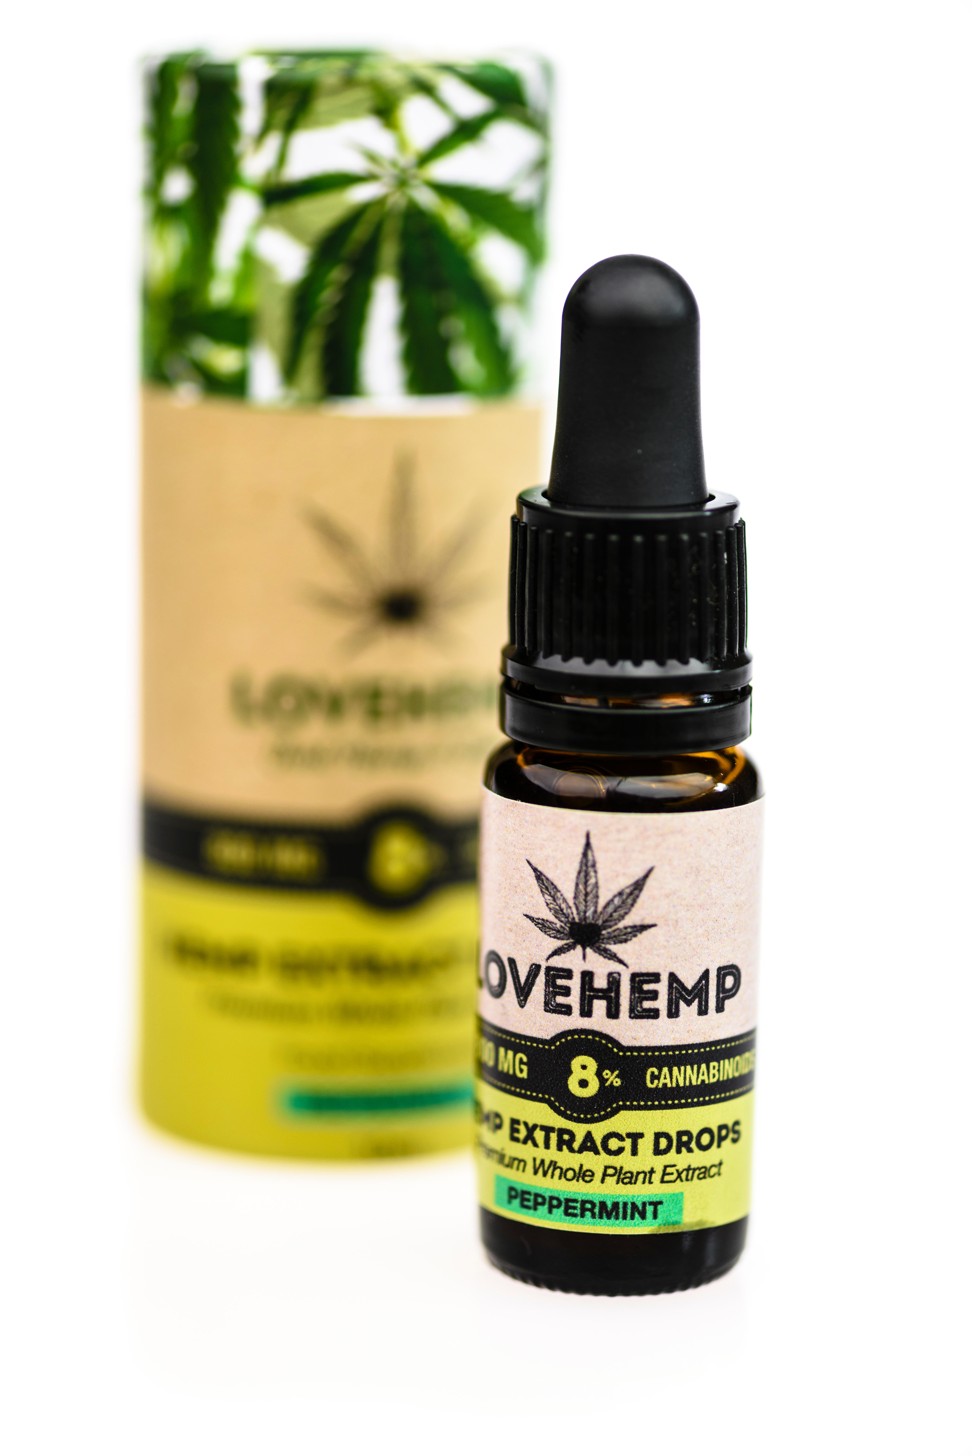 Hemp extract oil drops. It is high in Cannabinoids.